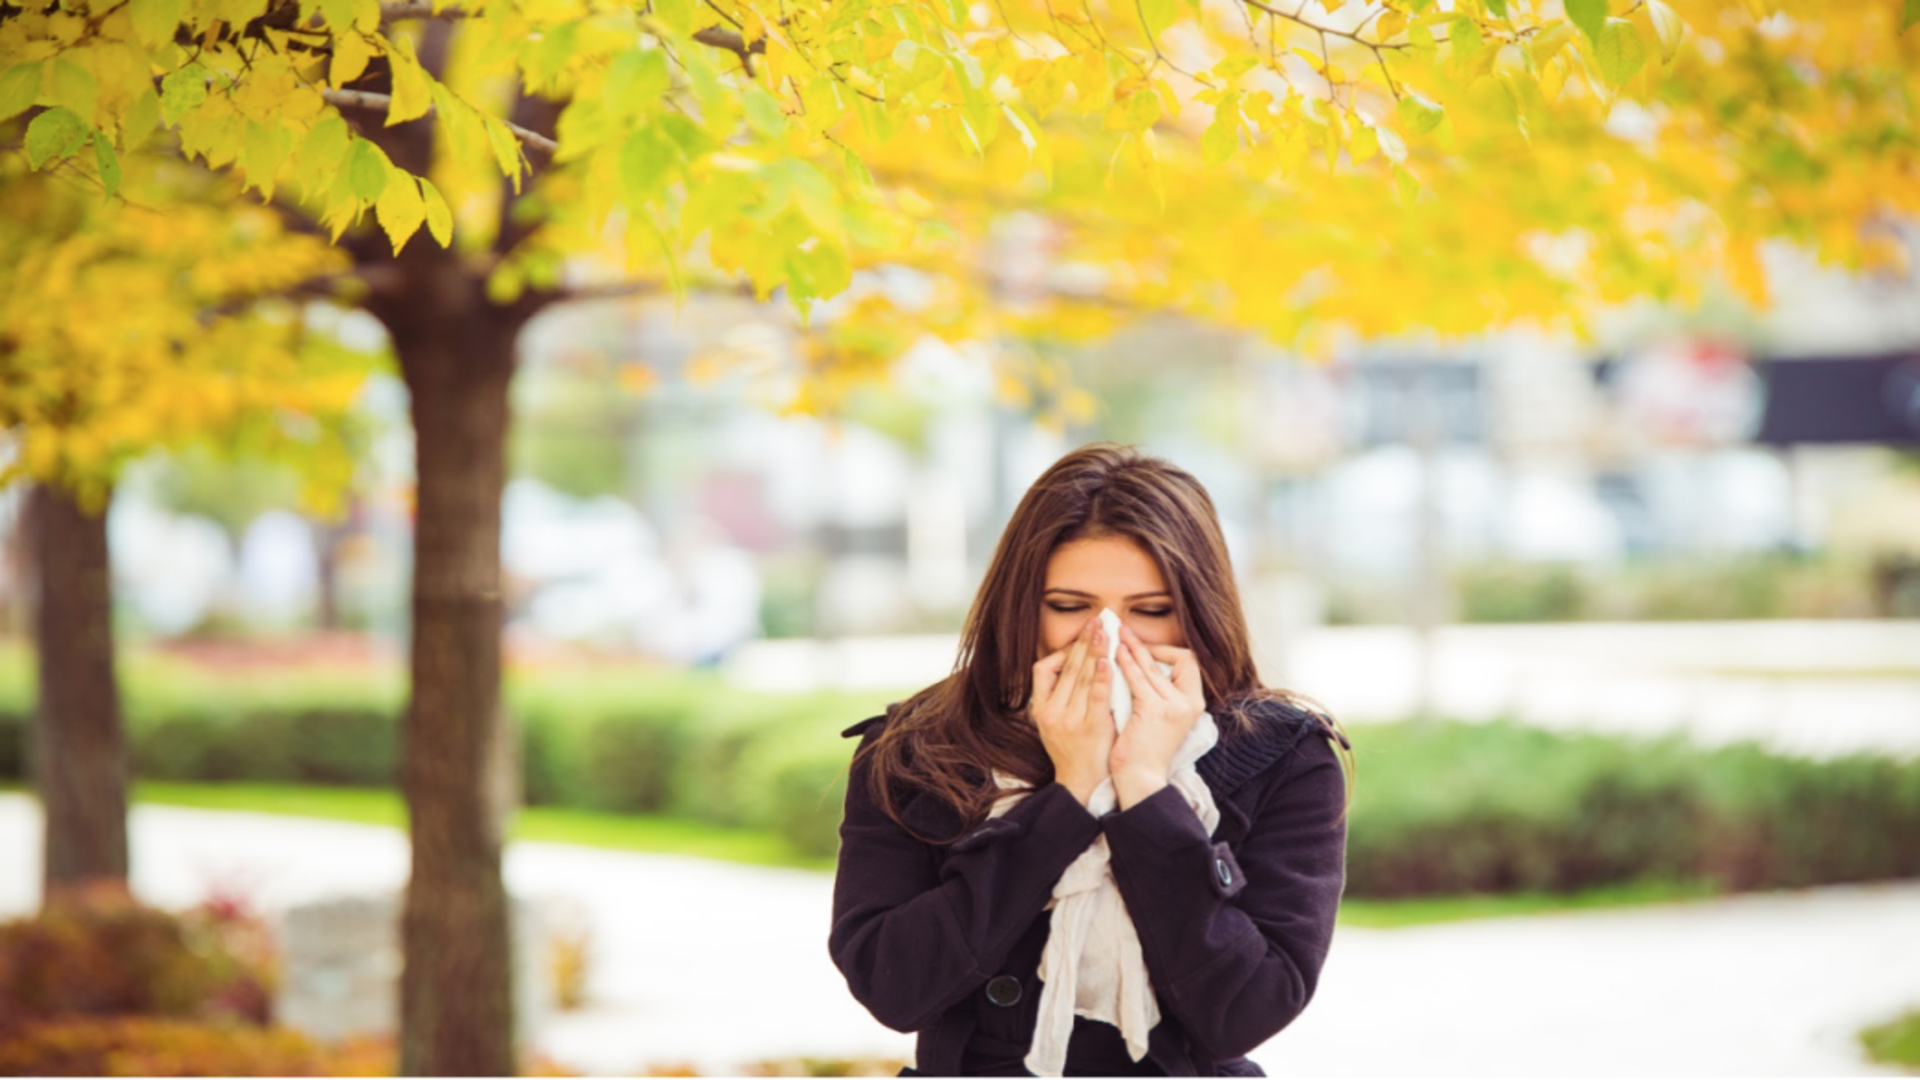 There is good news and bad news for allergy sufferers this fall